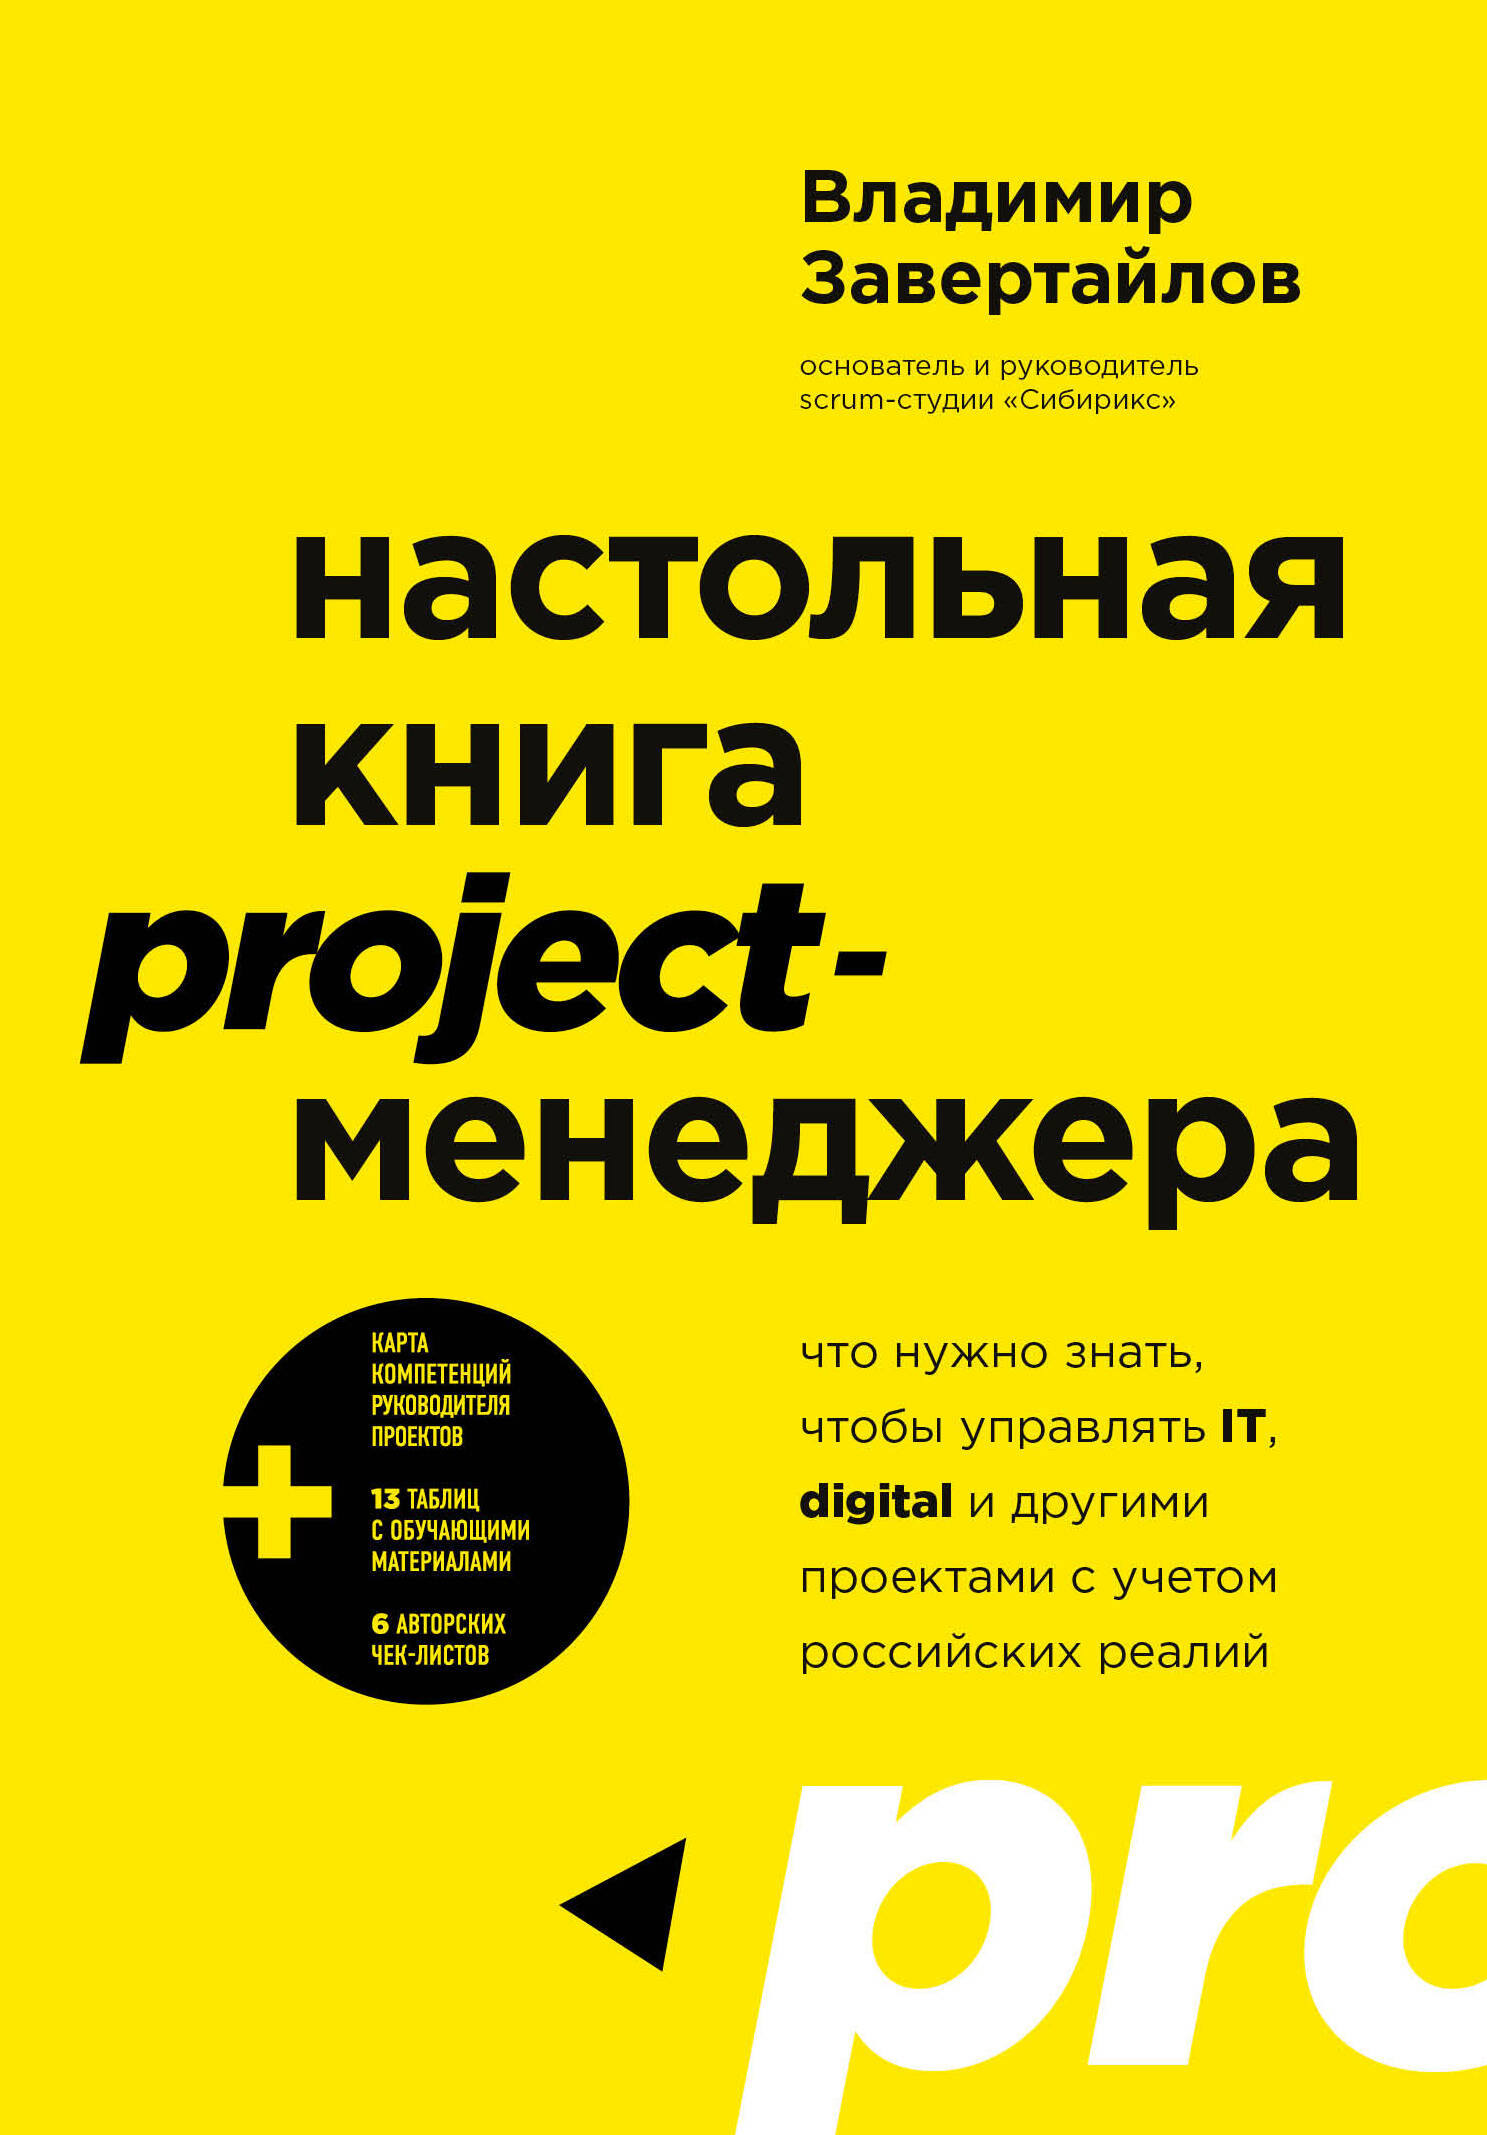   project-      IT